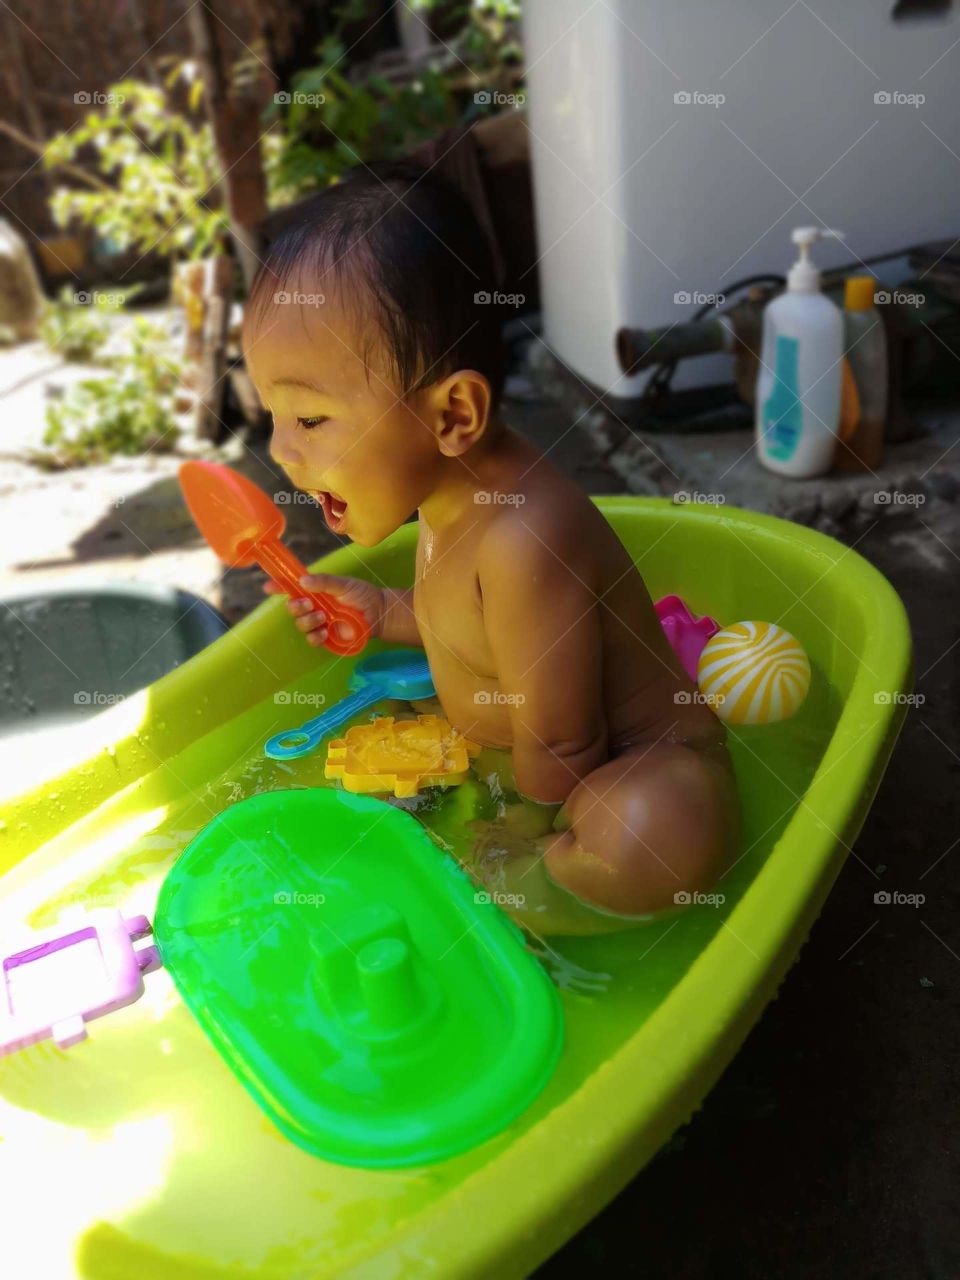 little boy enjoying while taking a bath with his toys.